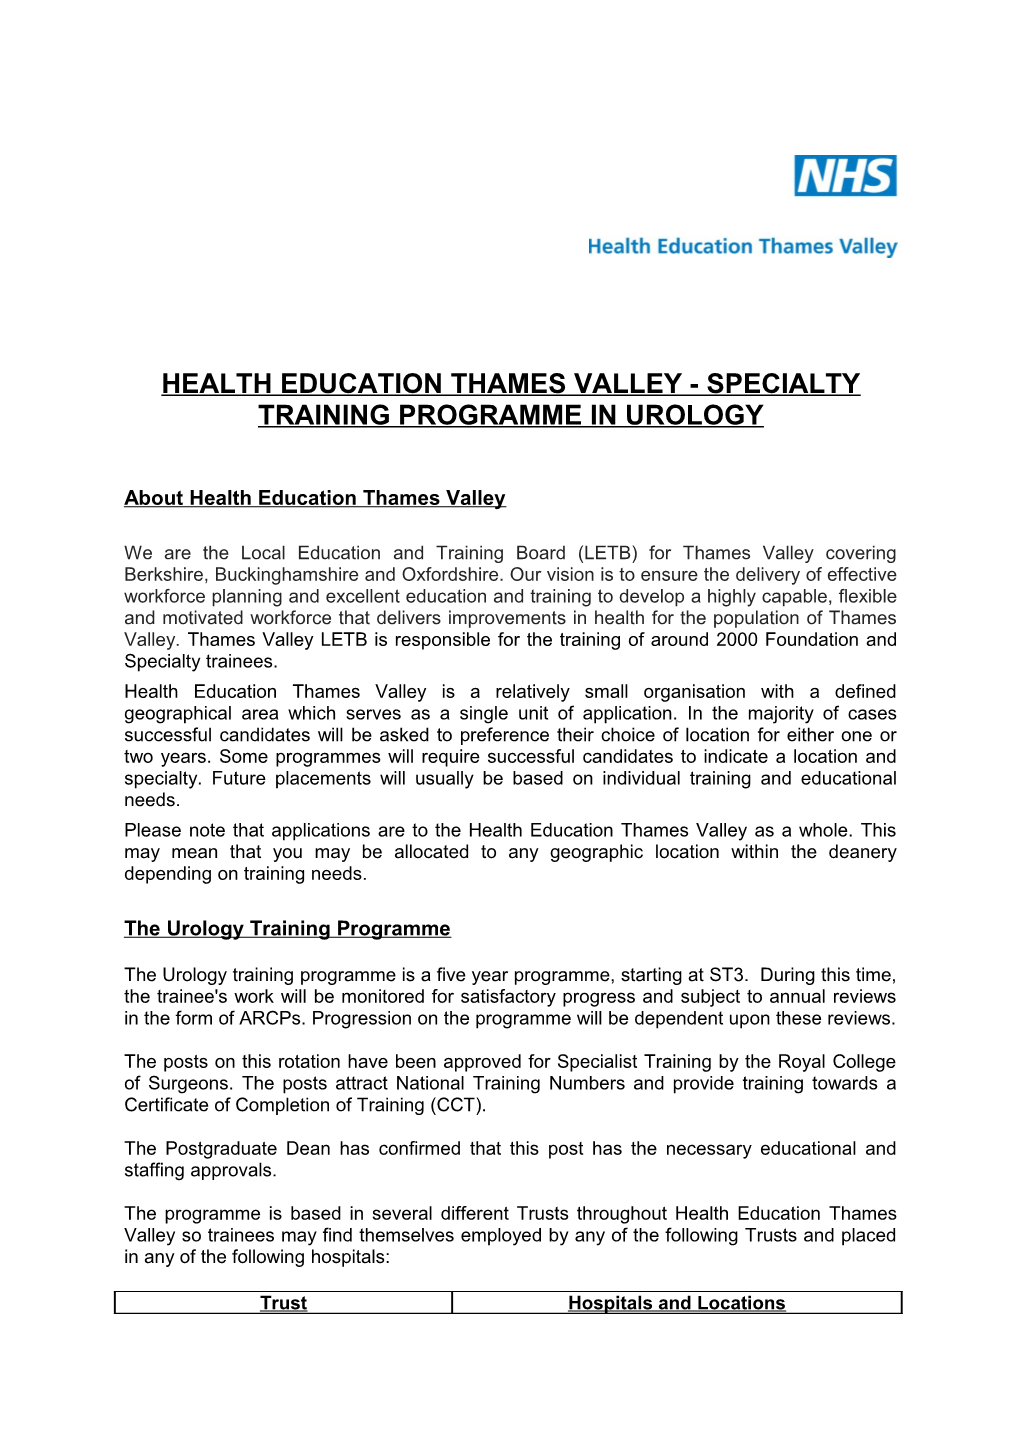 Health Education Thames Valley - Specialty Training Programme in Urology